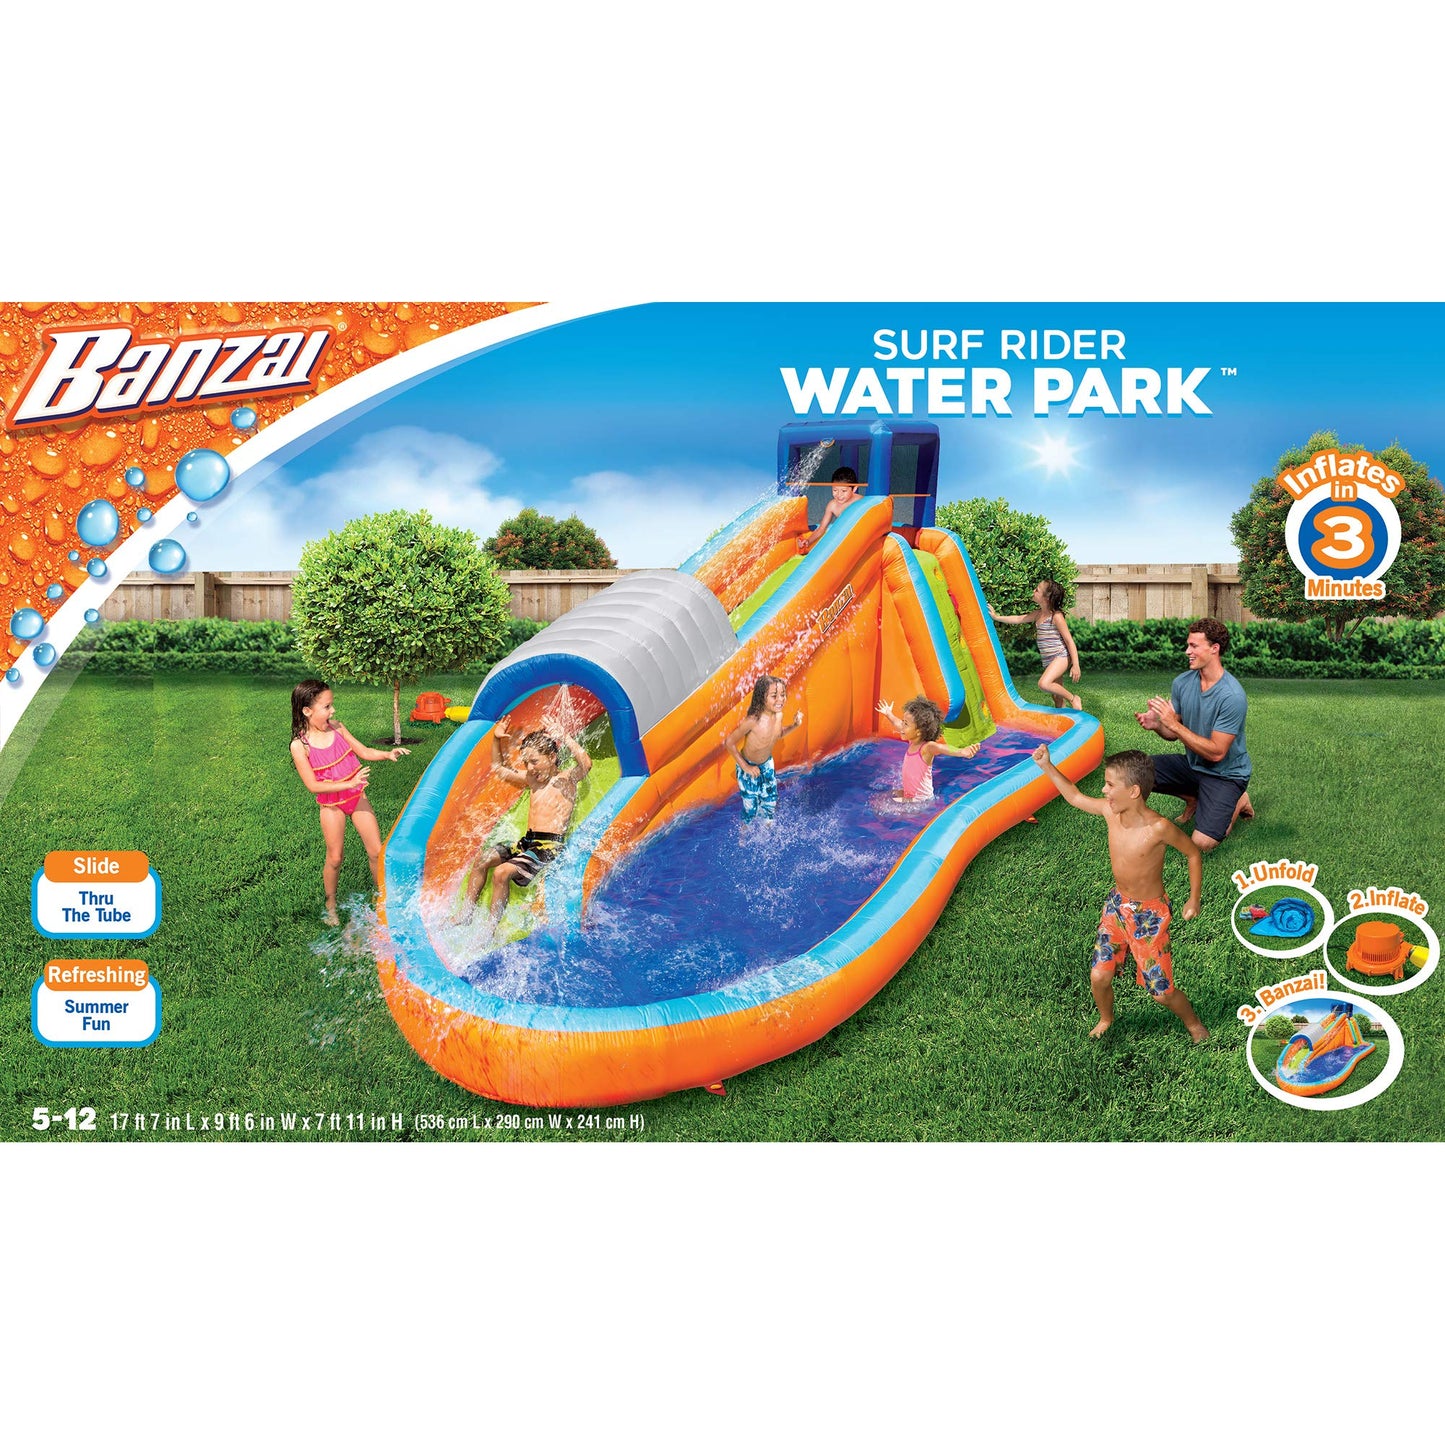 Banzai Surf Rider Water Park, Length: 17 ft 7 in, Width: 9 ft 6 in, Height: 7 ft 11 in, Inflatable Outdoor Backyard Water Slide Toy with Climbing Wall, Tunnel Slide, and Lagoon Splash Pool